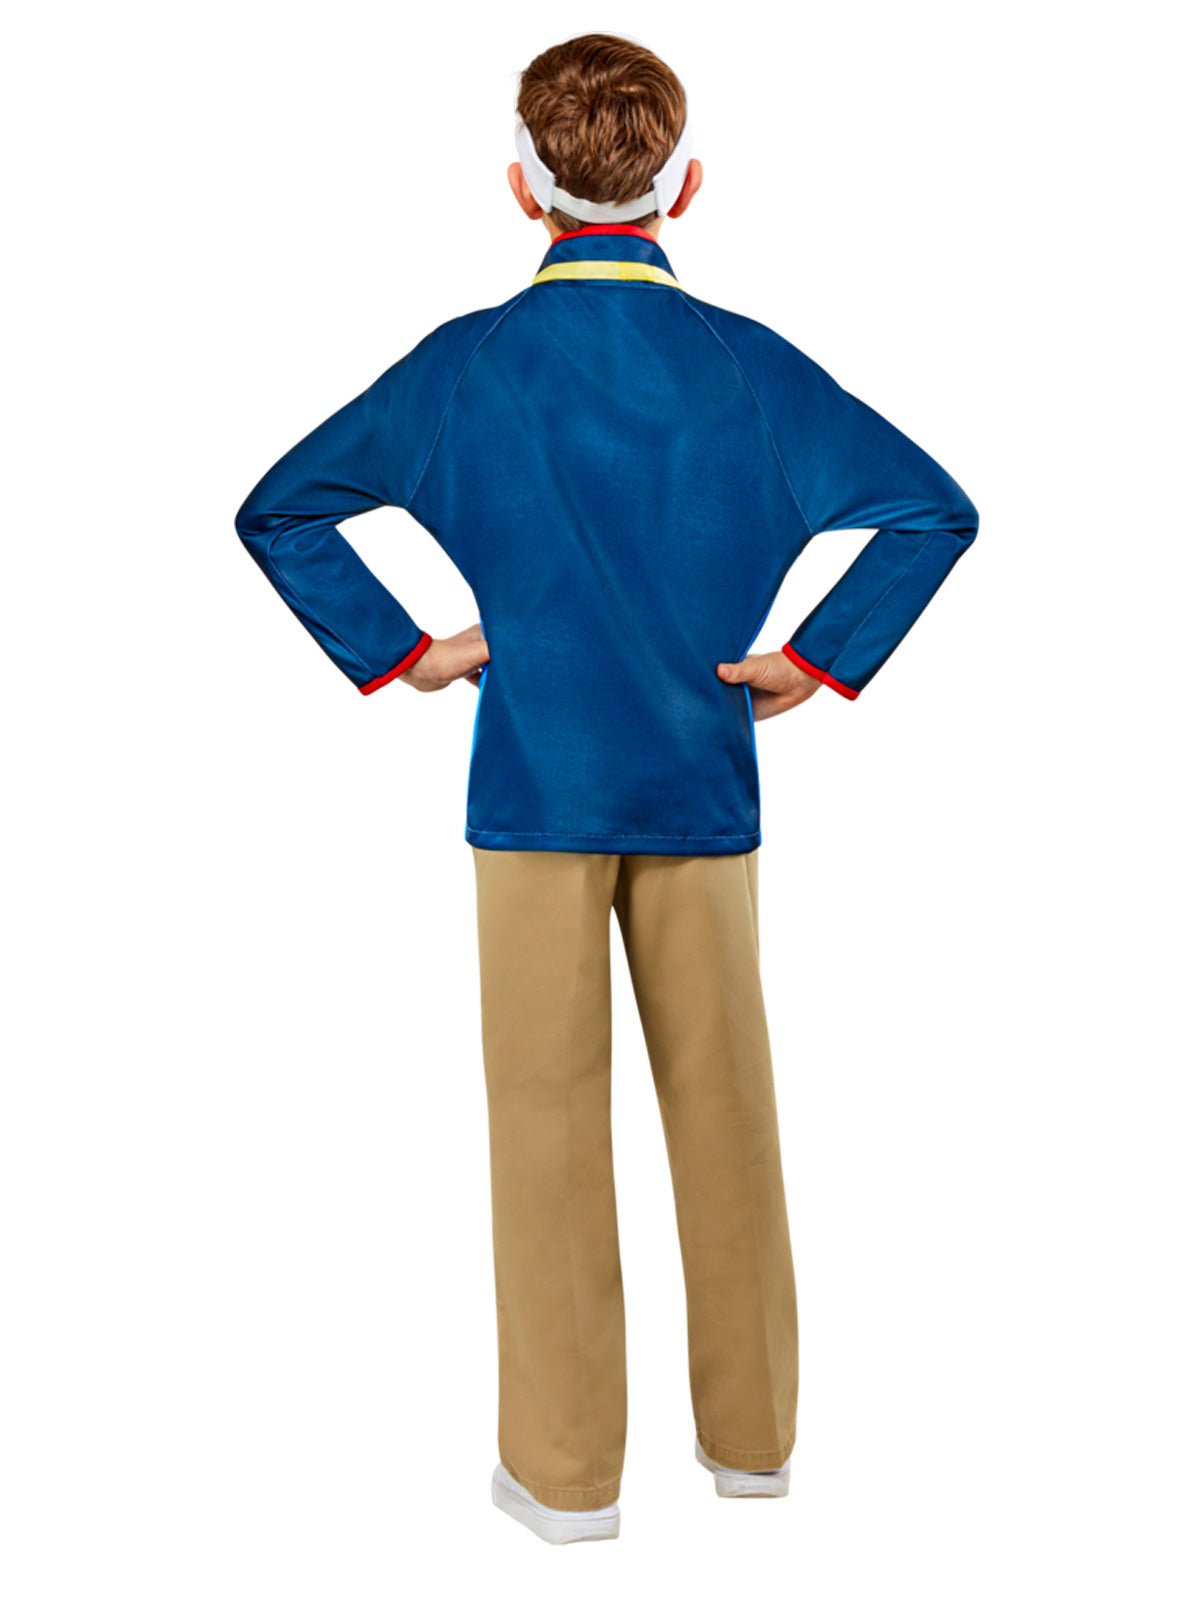 Dress Up as the Beloved Soccer Coach: Ted Lasso Fun!